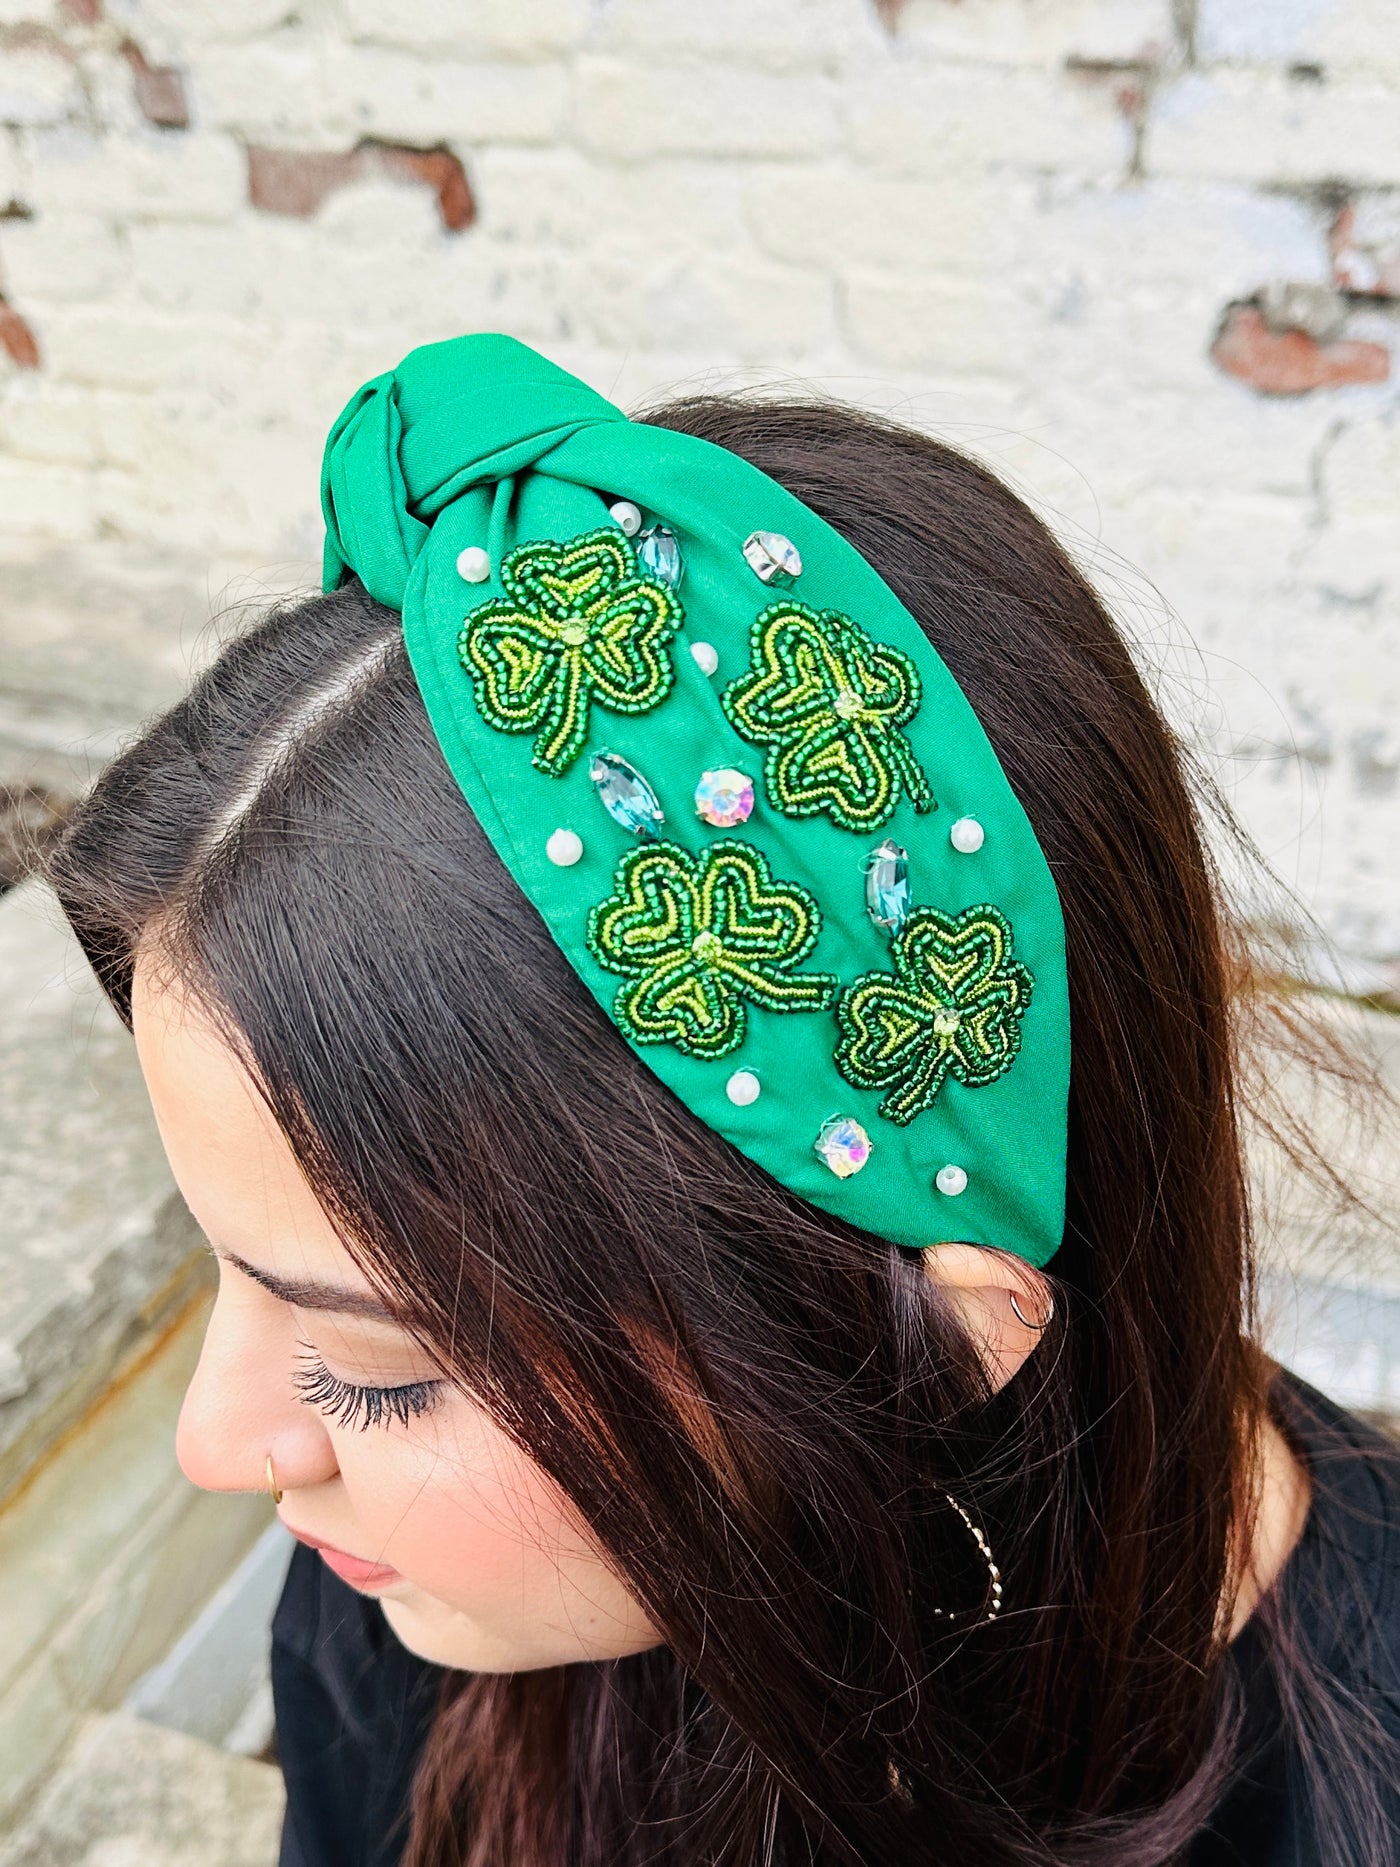 Luckiest Girl Embellished Headband • Green-DMC-Shop Anchored Bliss Women's Boutique Clothing Store